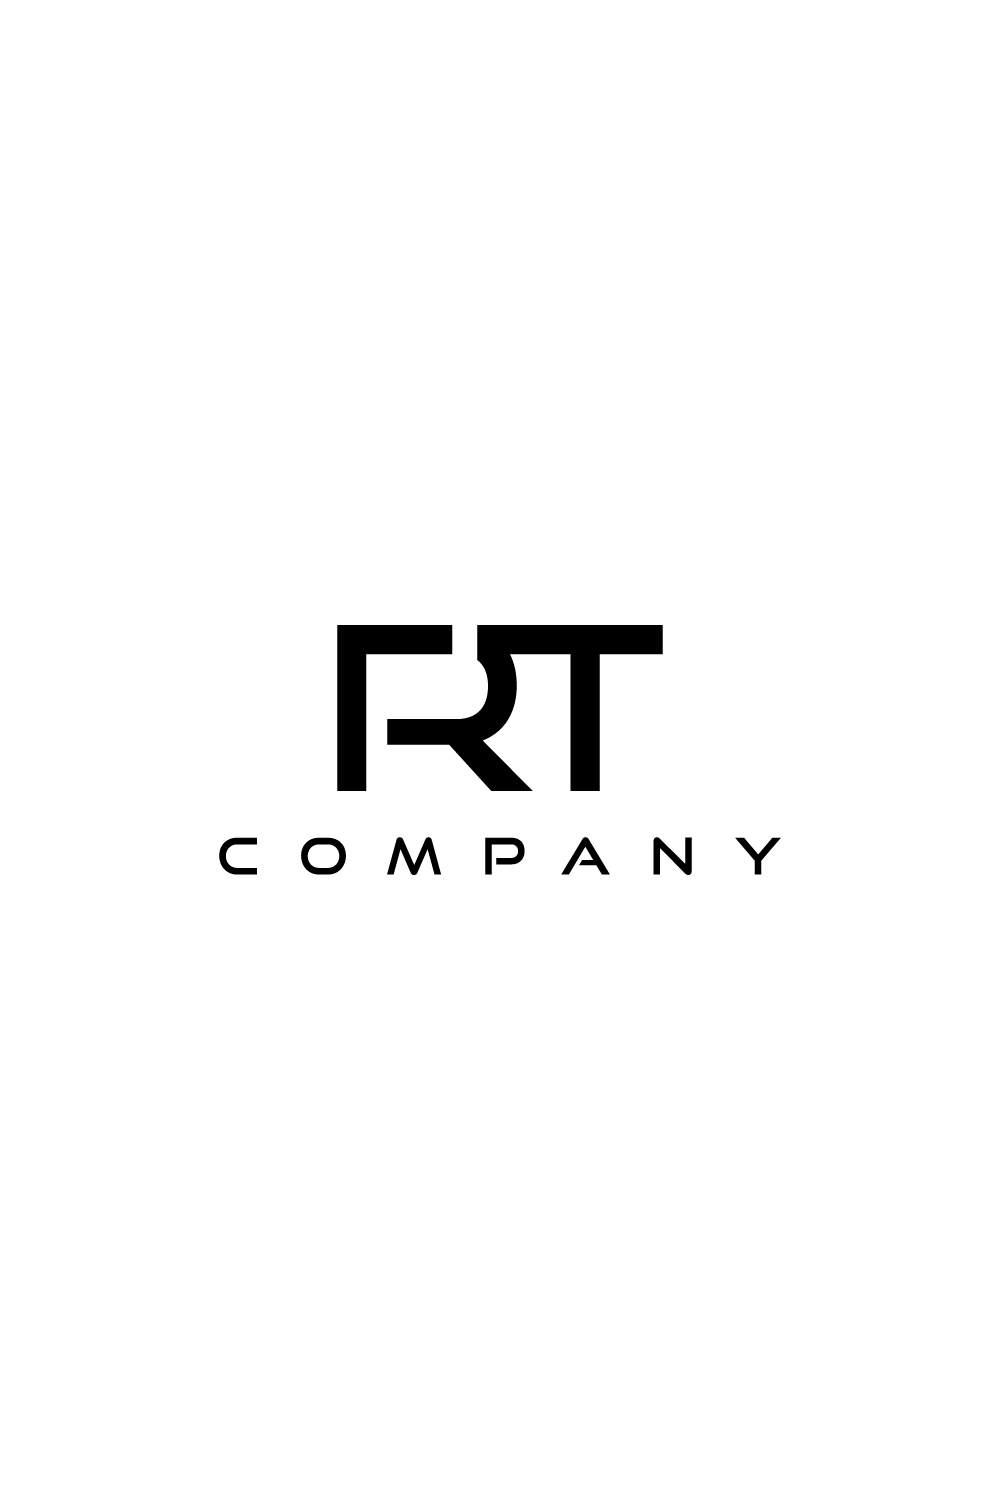 RT letter mark logo with a modern look pinterest preview image.